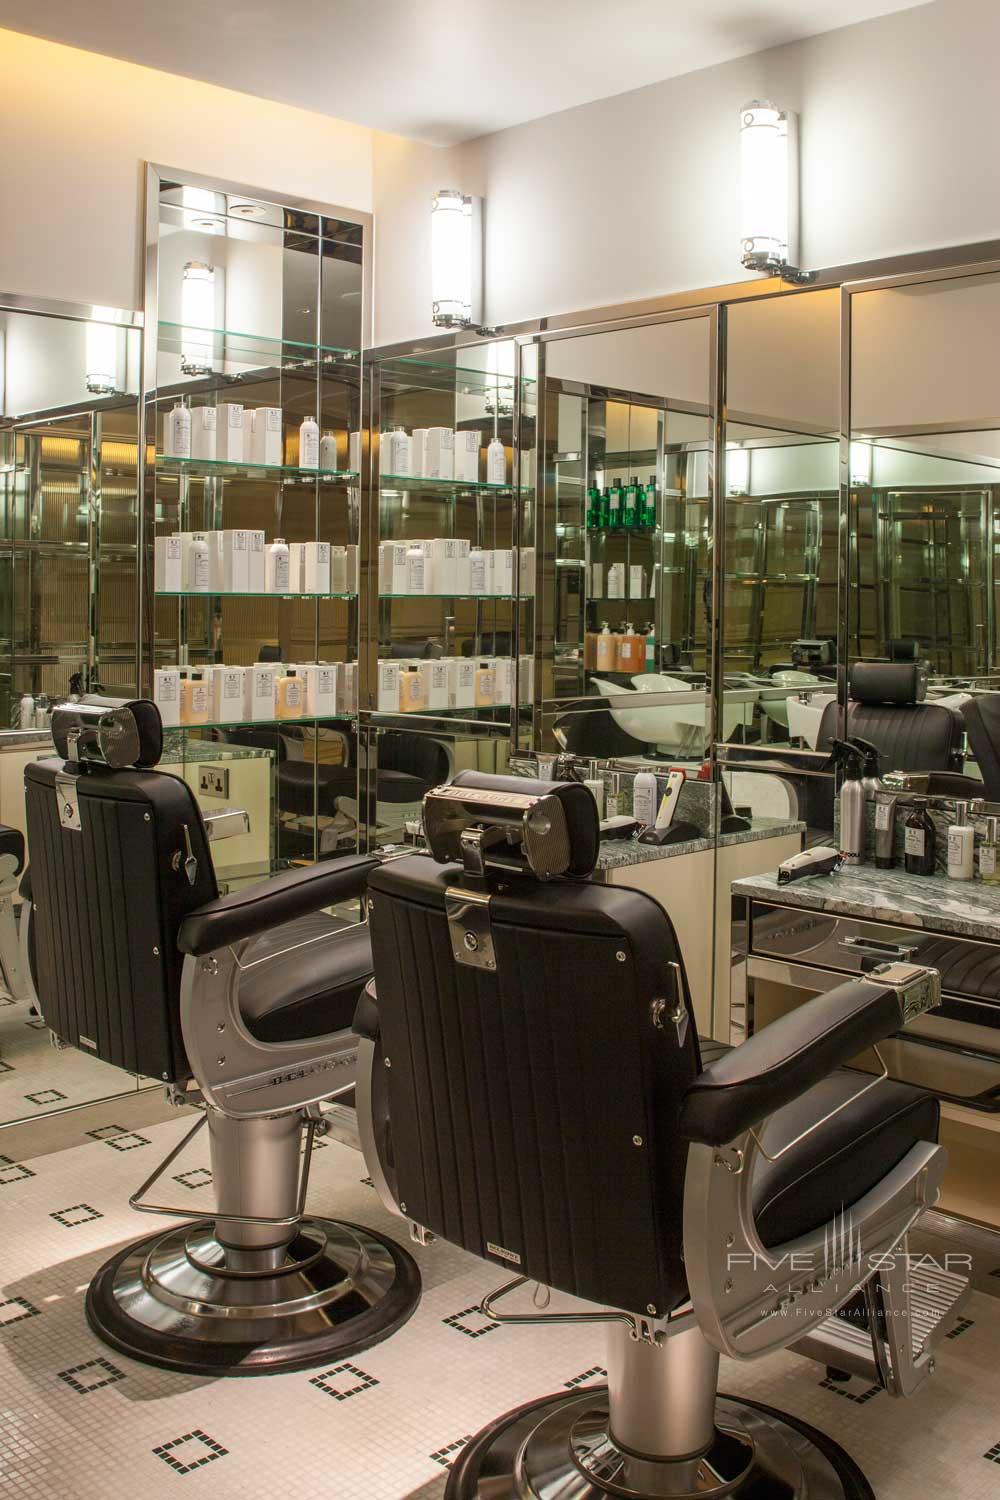 Spa and Salon at The Beaumont London